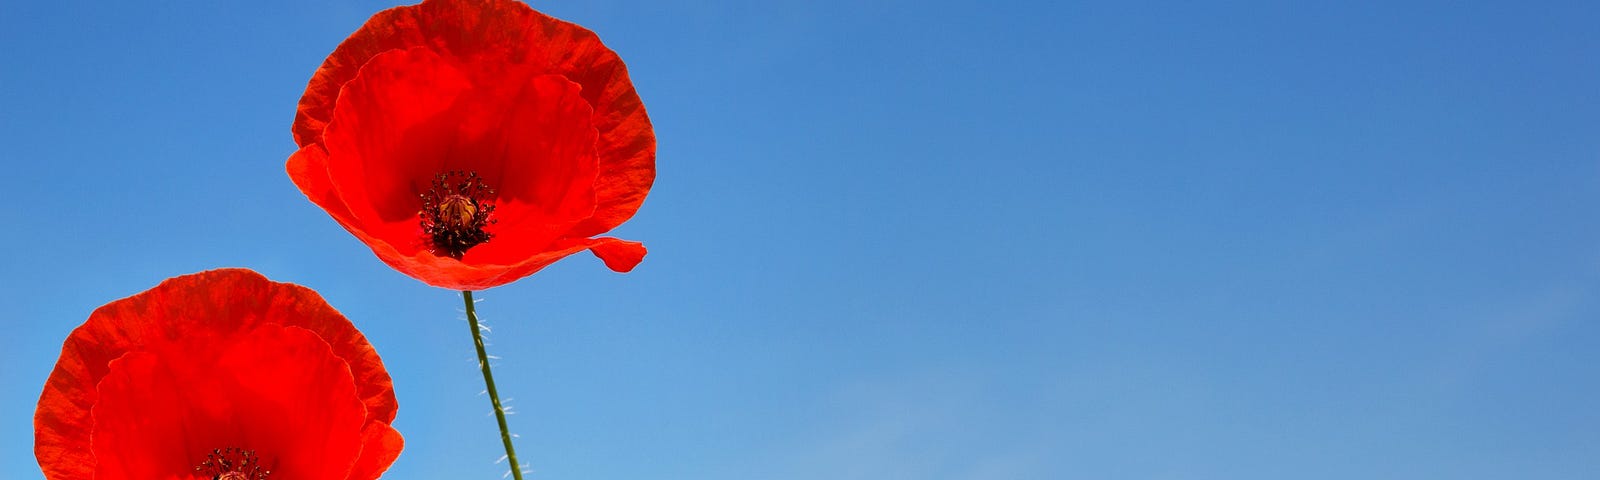 two poppies against a clear blue sky